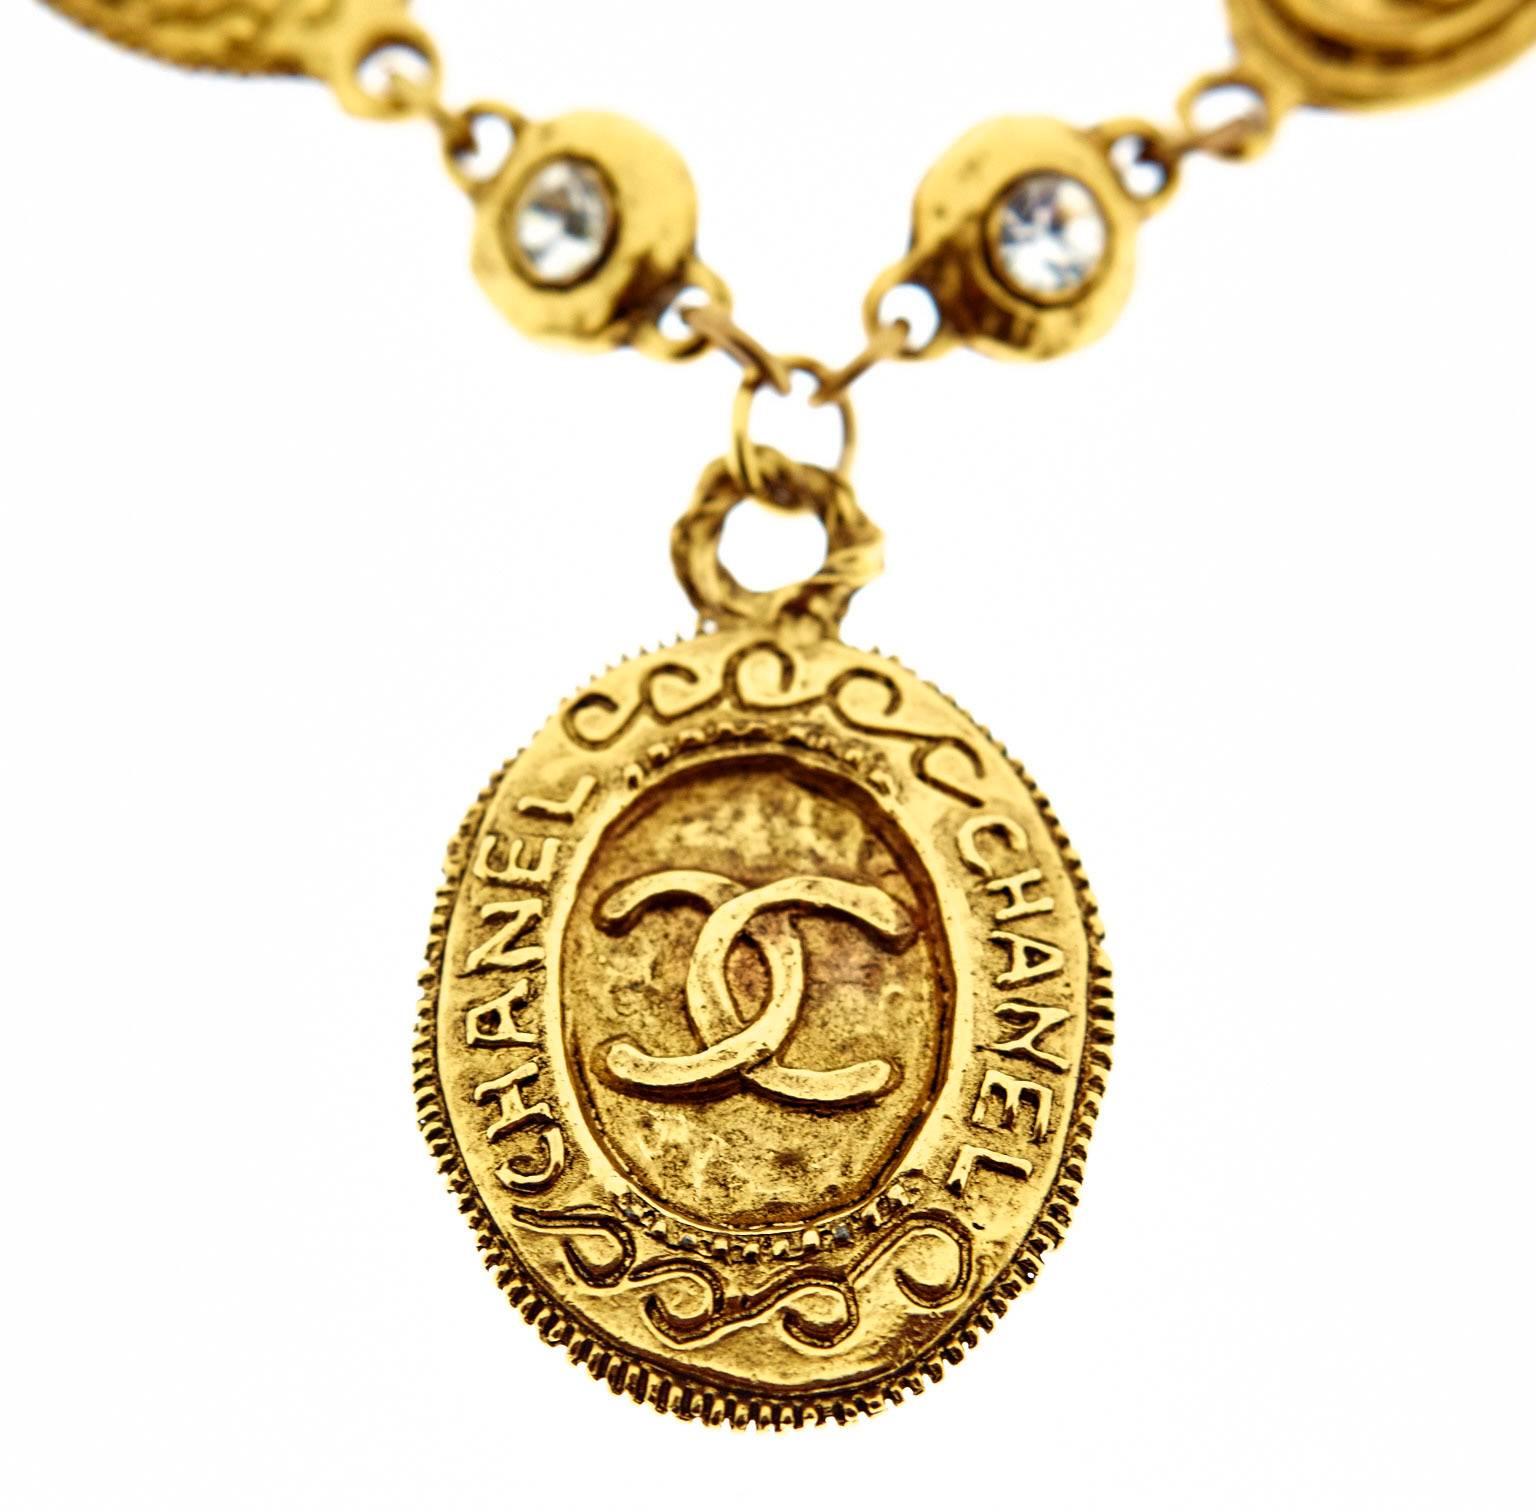 A vintage Chanel necklace from the 1970s with 9 gold plated double sided discs with the CC logo including a drop pendant. The necklace is 18 inches long plus a 1.5 inch/ 4.2cm drop pendant which is 2.7cm wide. The medium discs are 1.9cm wide. The